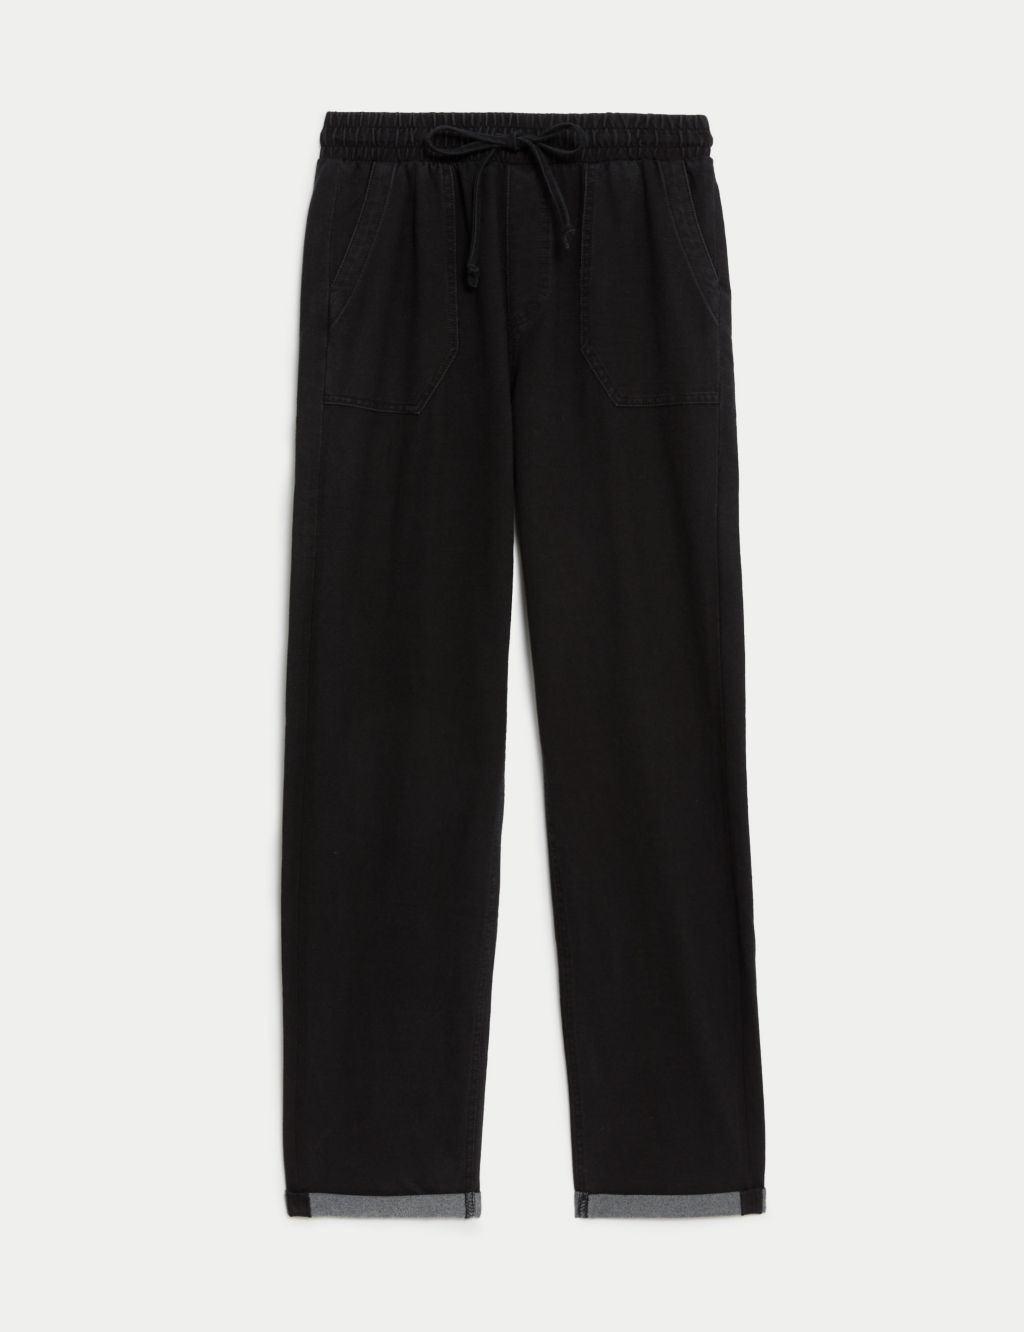 Denim Jersey Straight Leg Trousers | M&S Collection | M&S